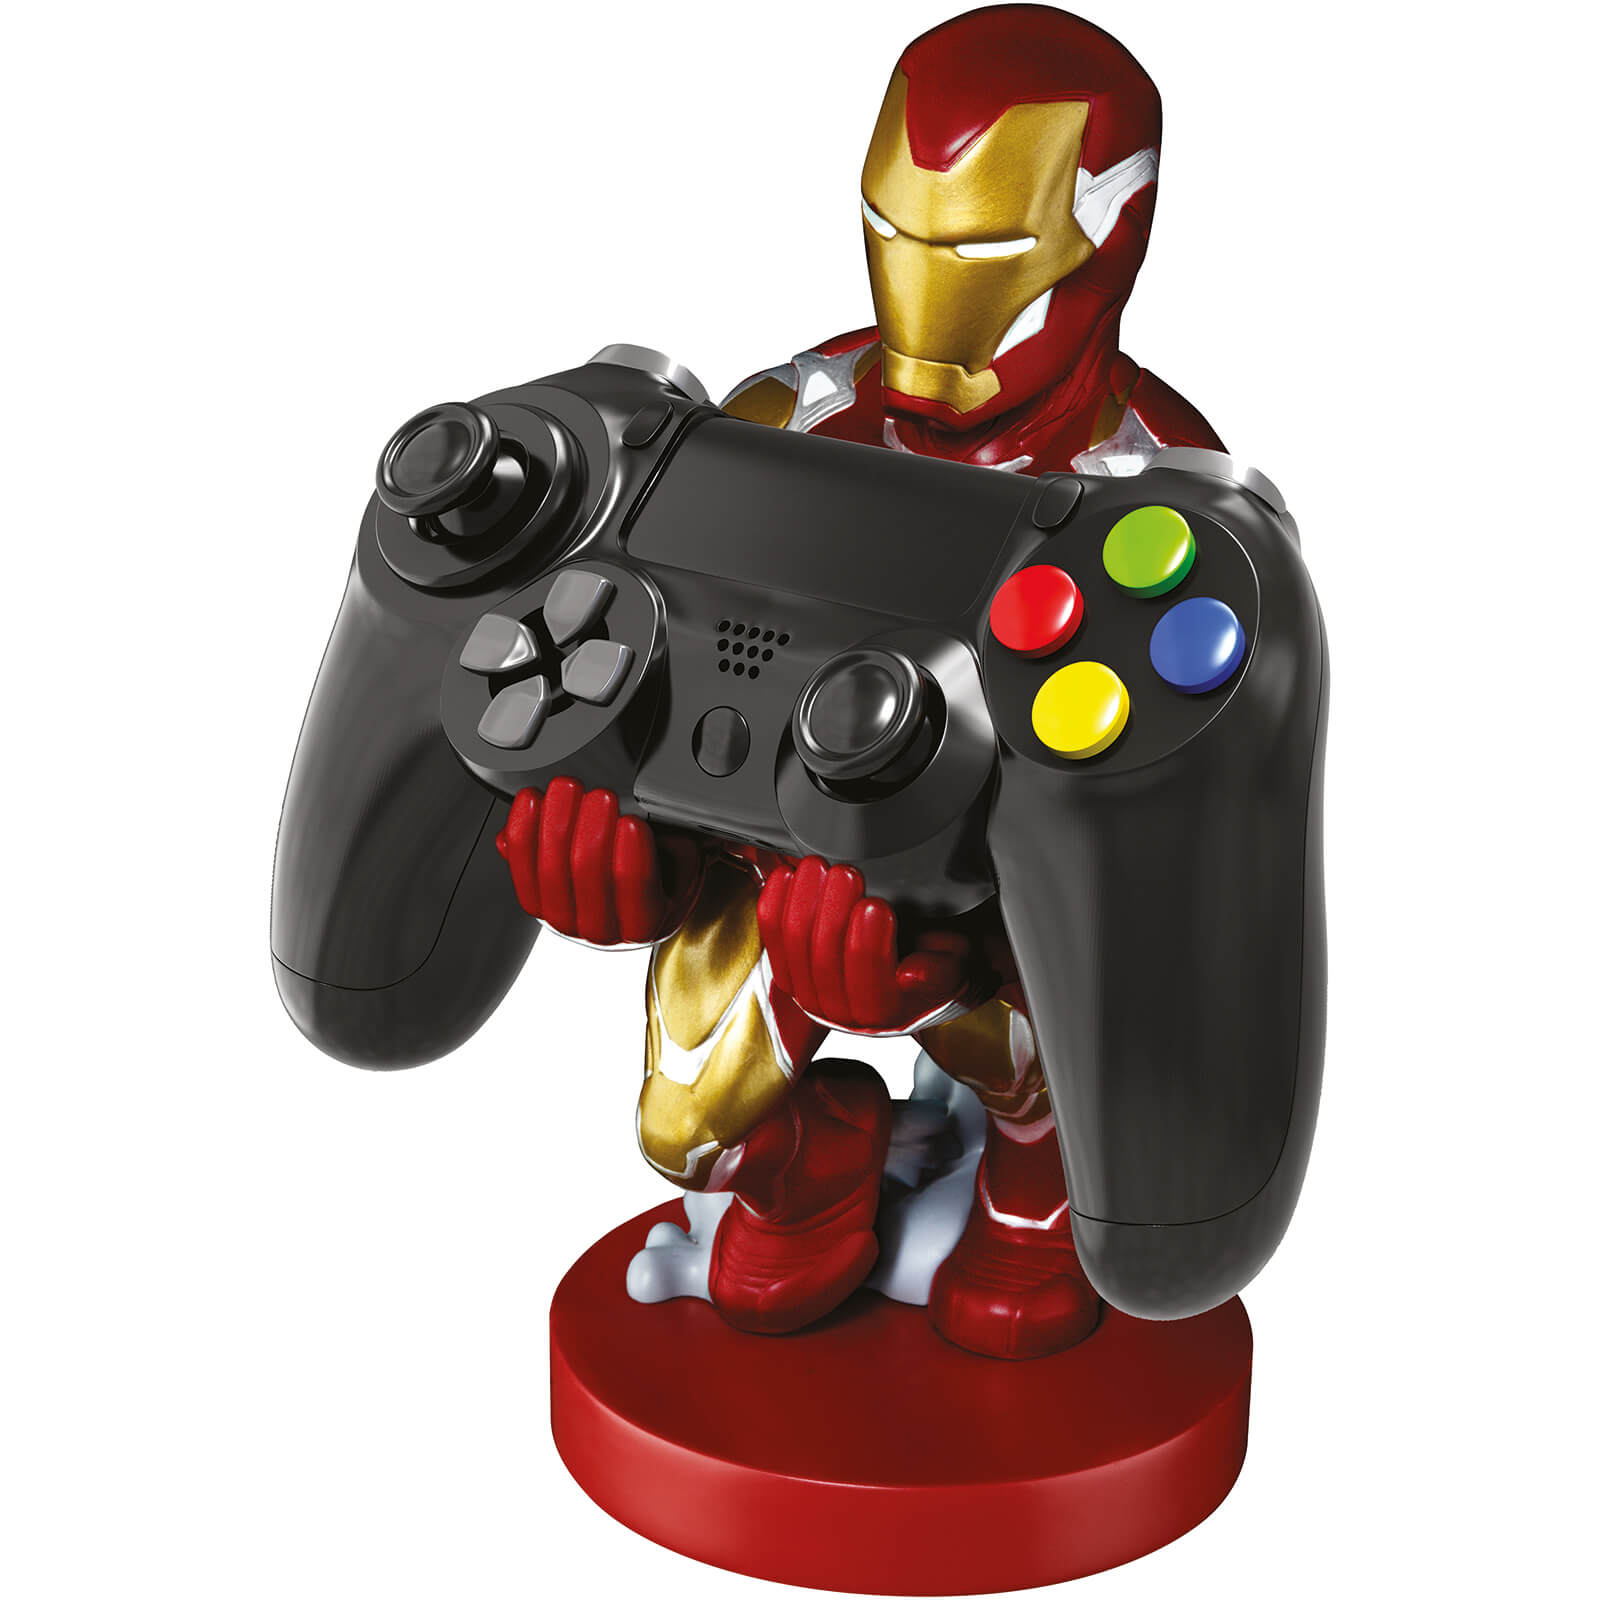 Image of Marvel Avengers: Endgame Iron Man 8 Inch Cable Guy Controller and Smartphone Stand